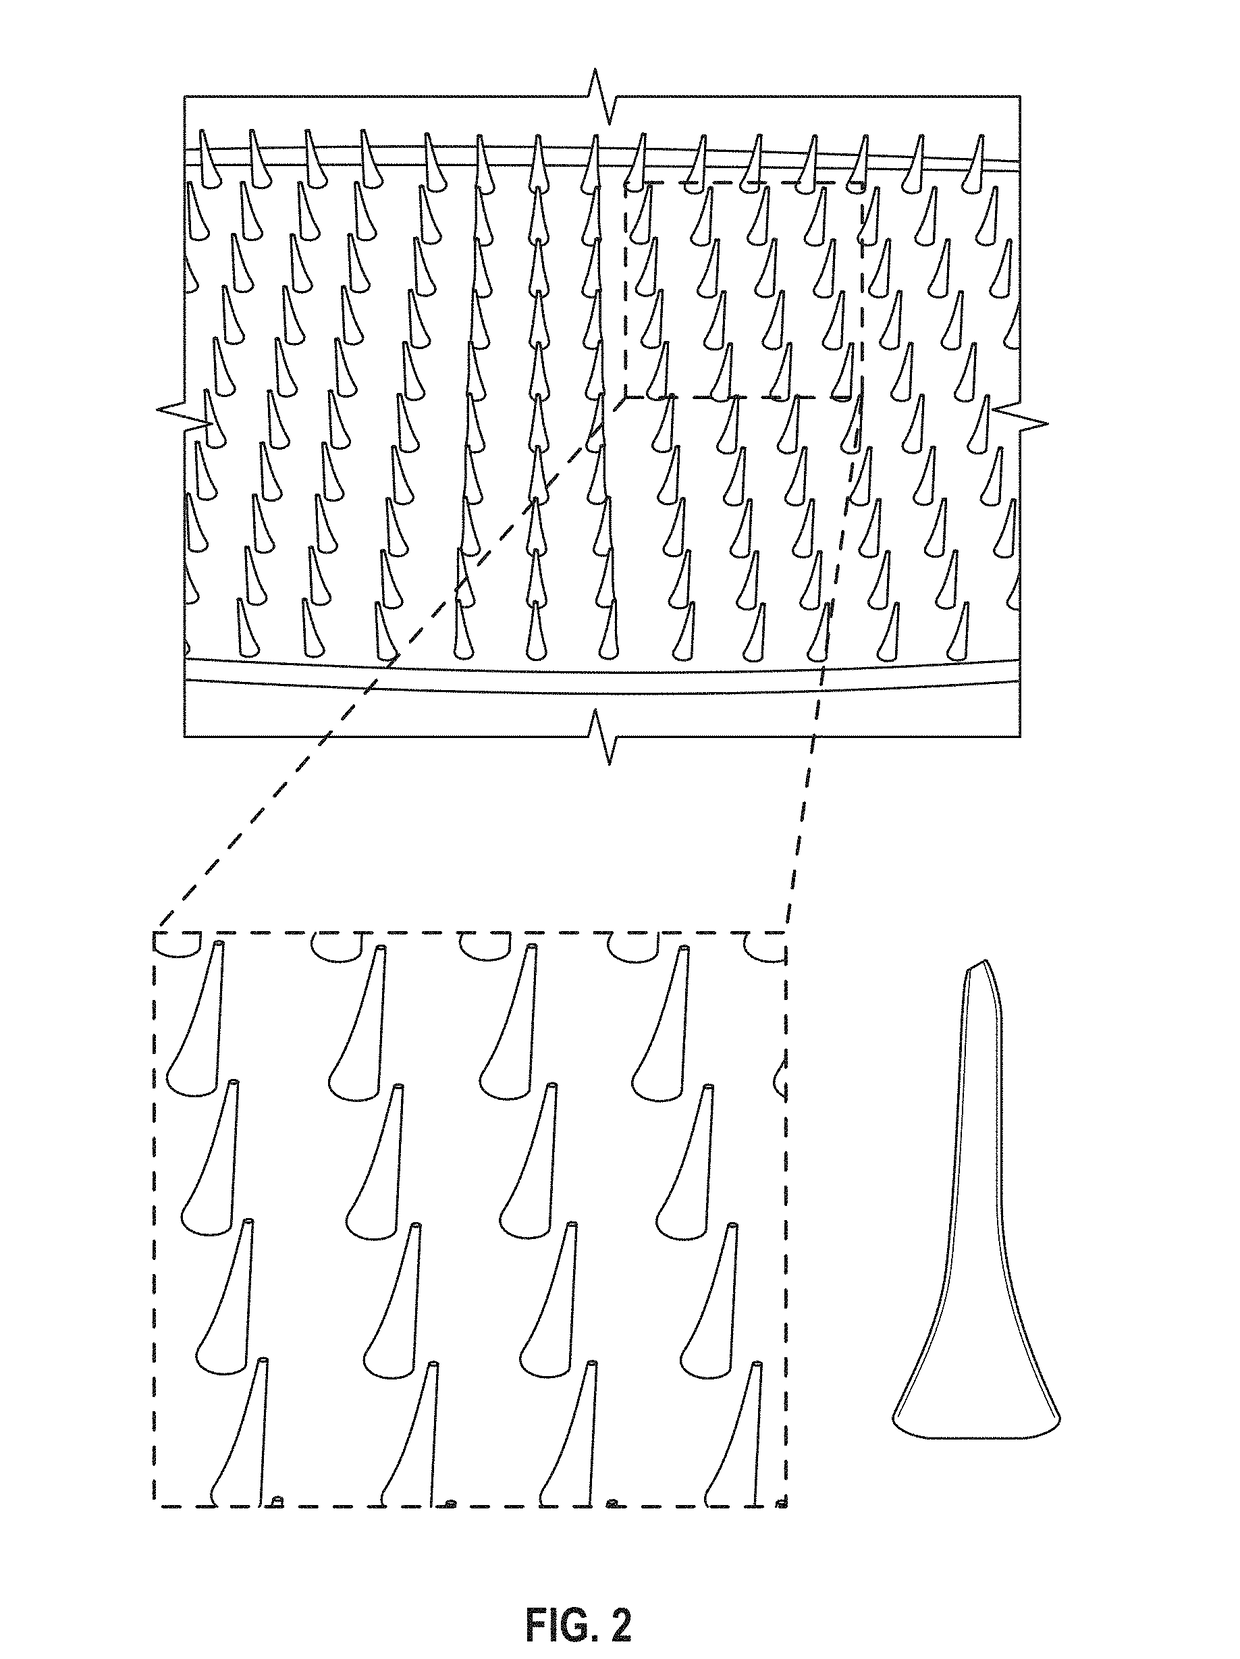 Microneedle compositions and methods of using same